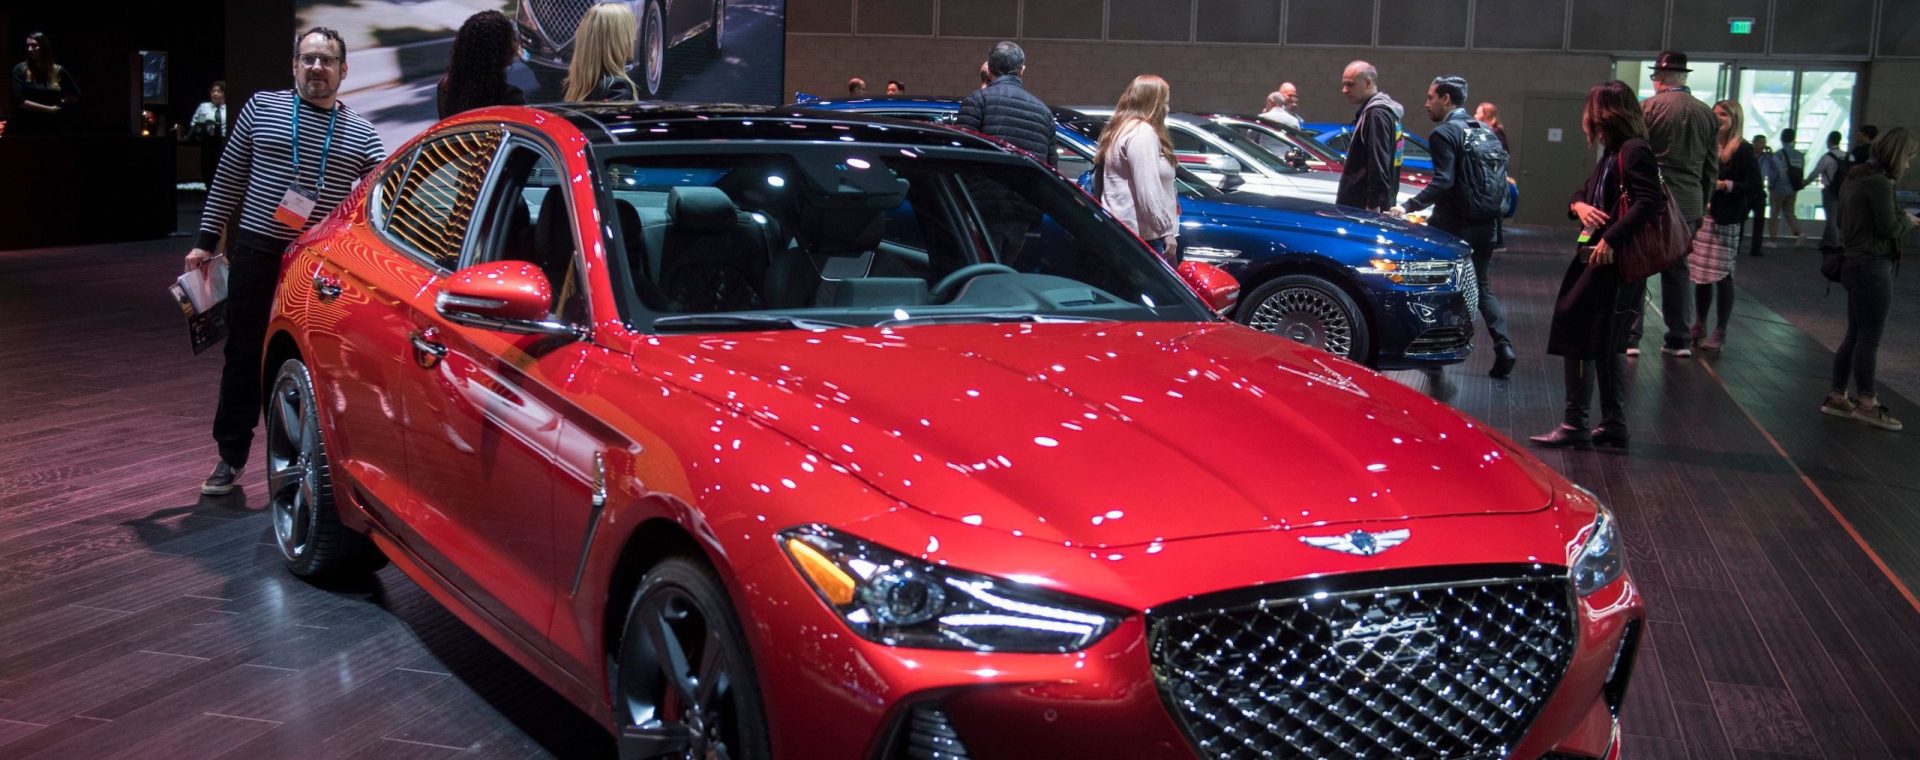 The red Genesis G70 car on display during the AutoMobility LA event, at the 2019 Los Angeles Auto Show